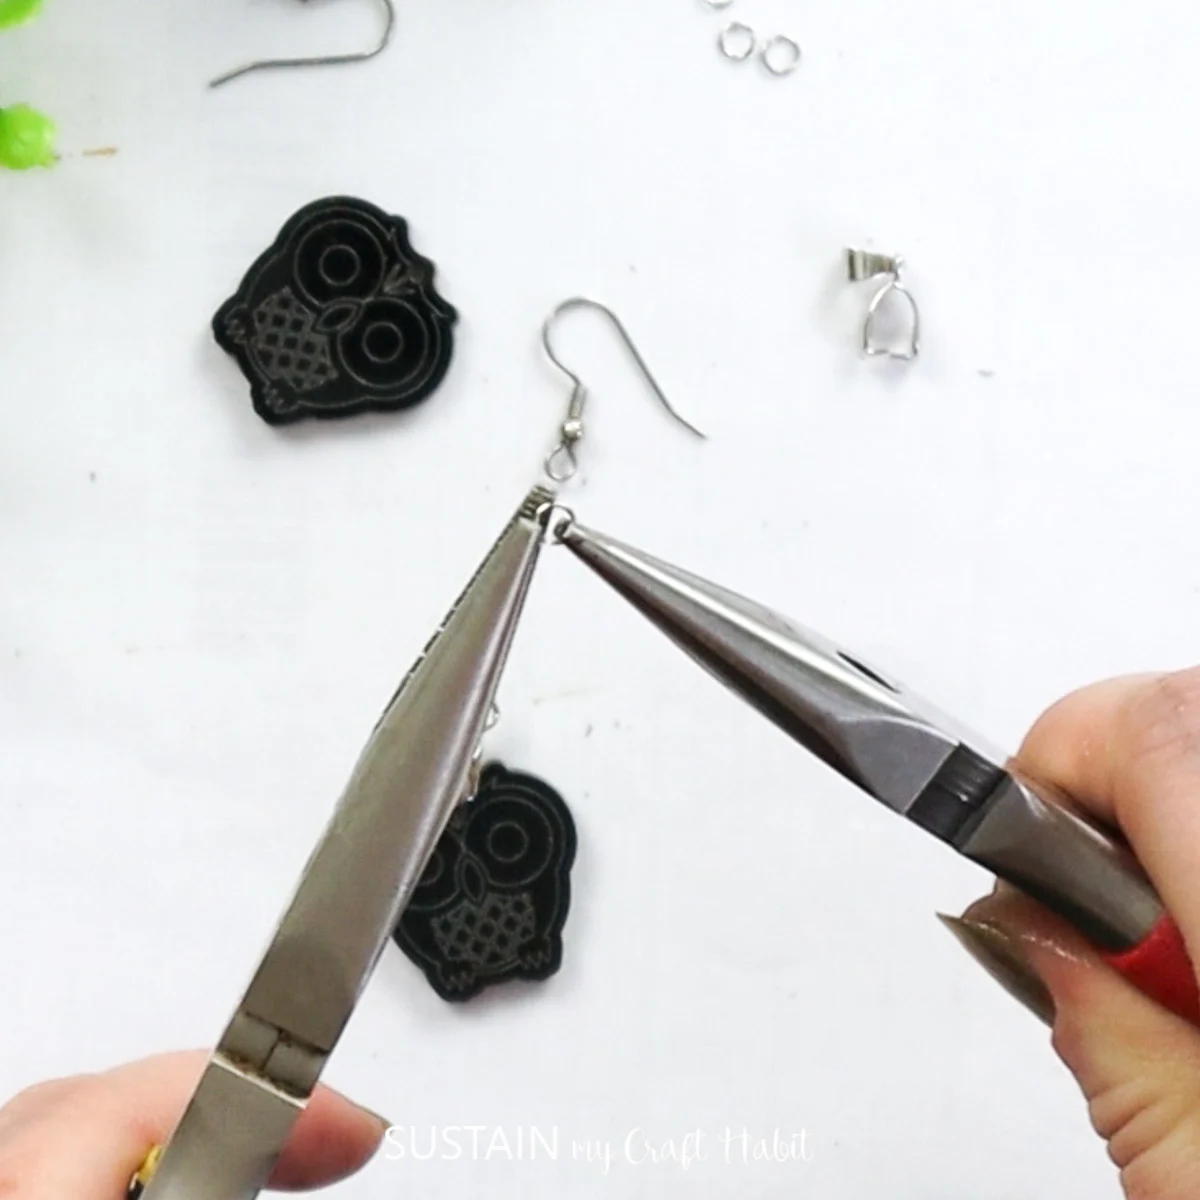 Using pliers to open a jewelry eyelet.